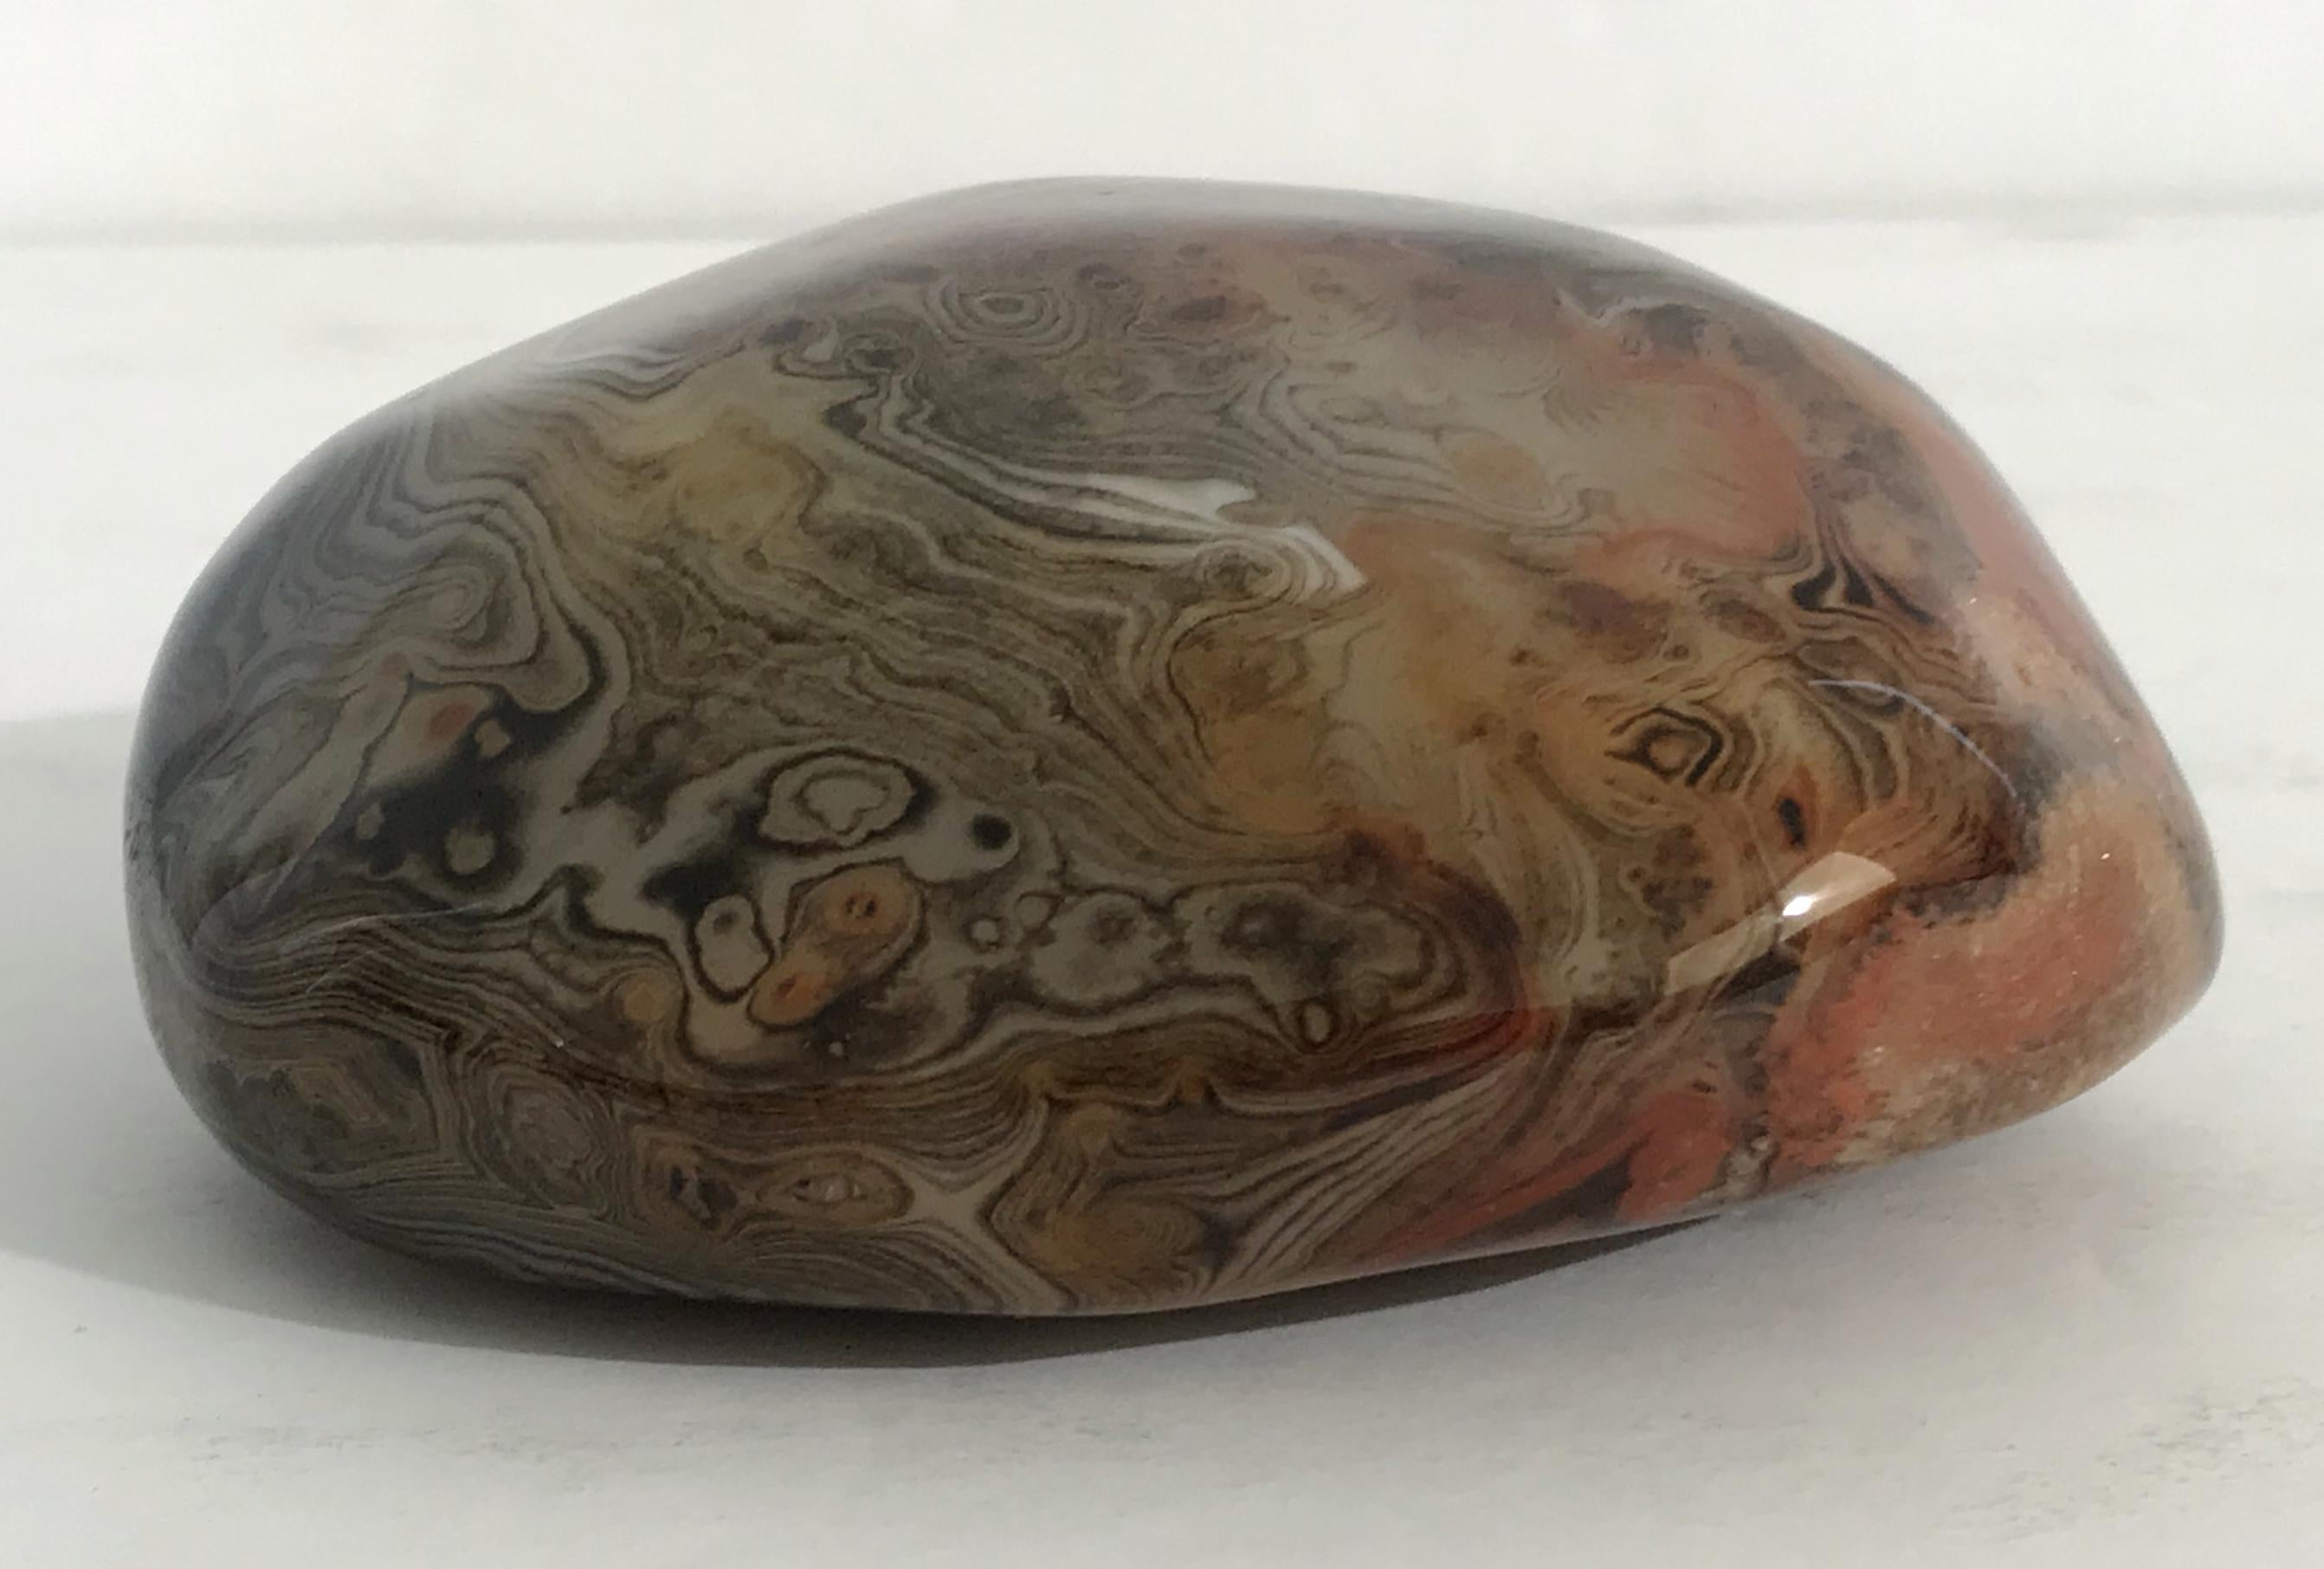 Hand polished agate onyx stone paperweight in black, brown, and red intricate layered patterns
Measures: diameter 4 inches, height 2 inches
1 in stock in Palm Springs ON 50% OFF SALE for $225 !!
This piece makes for a great and unique gift!
Order